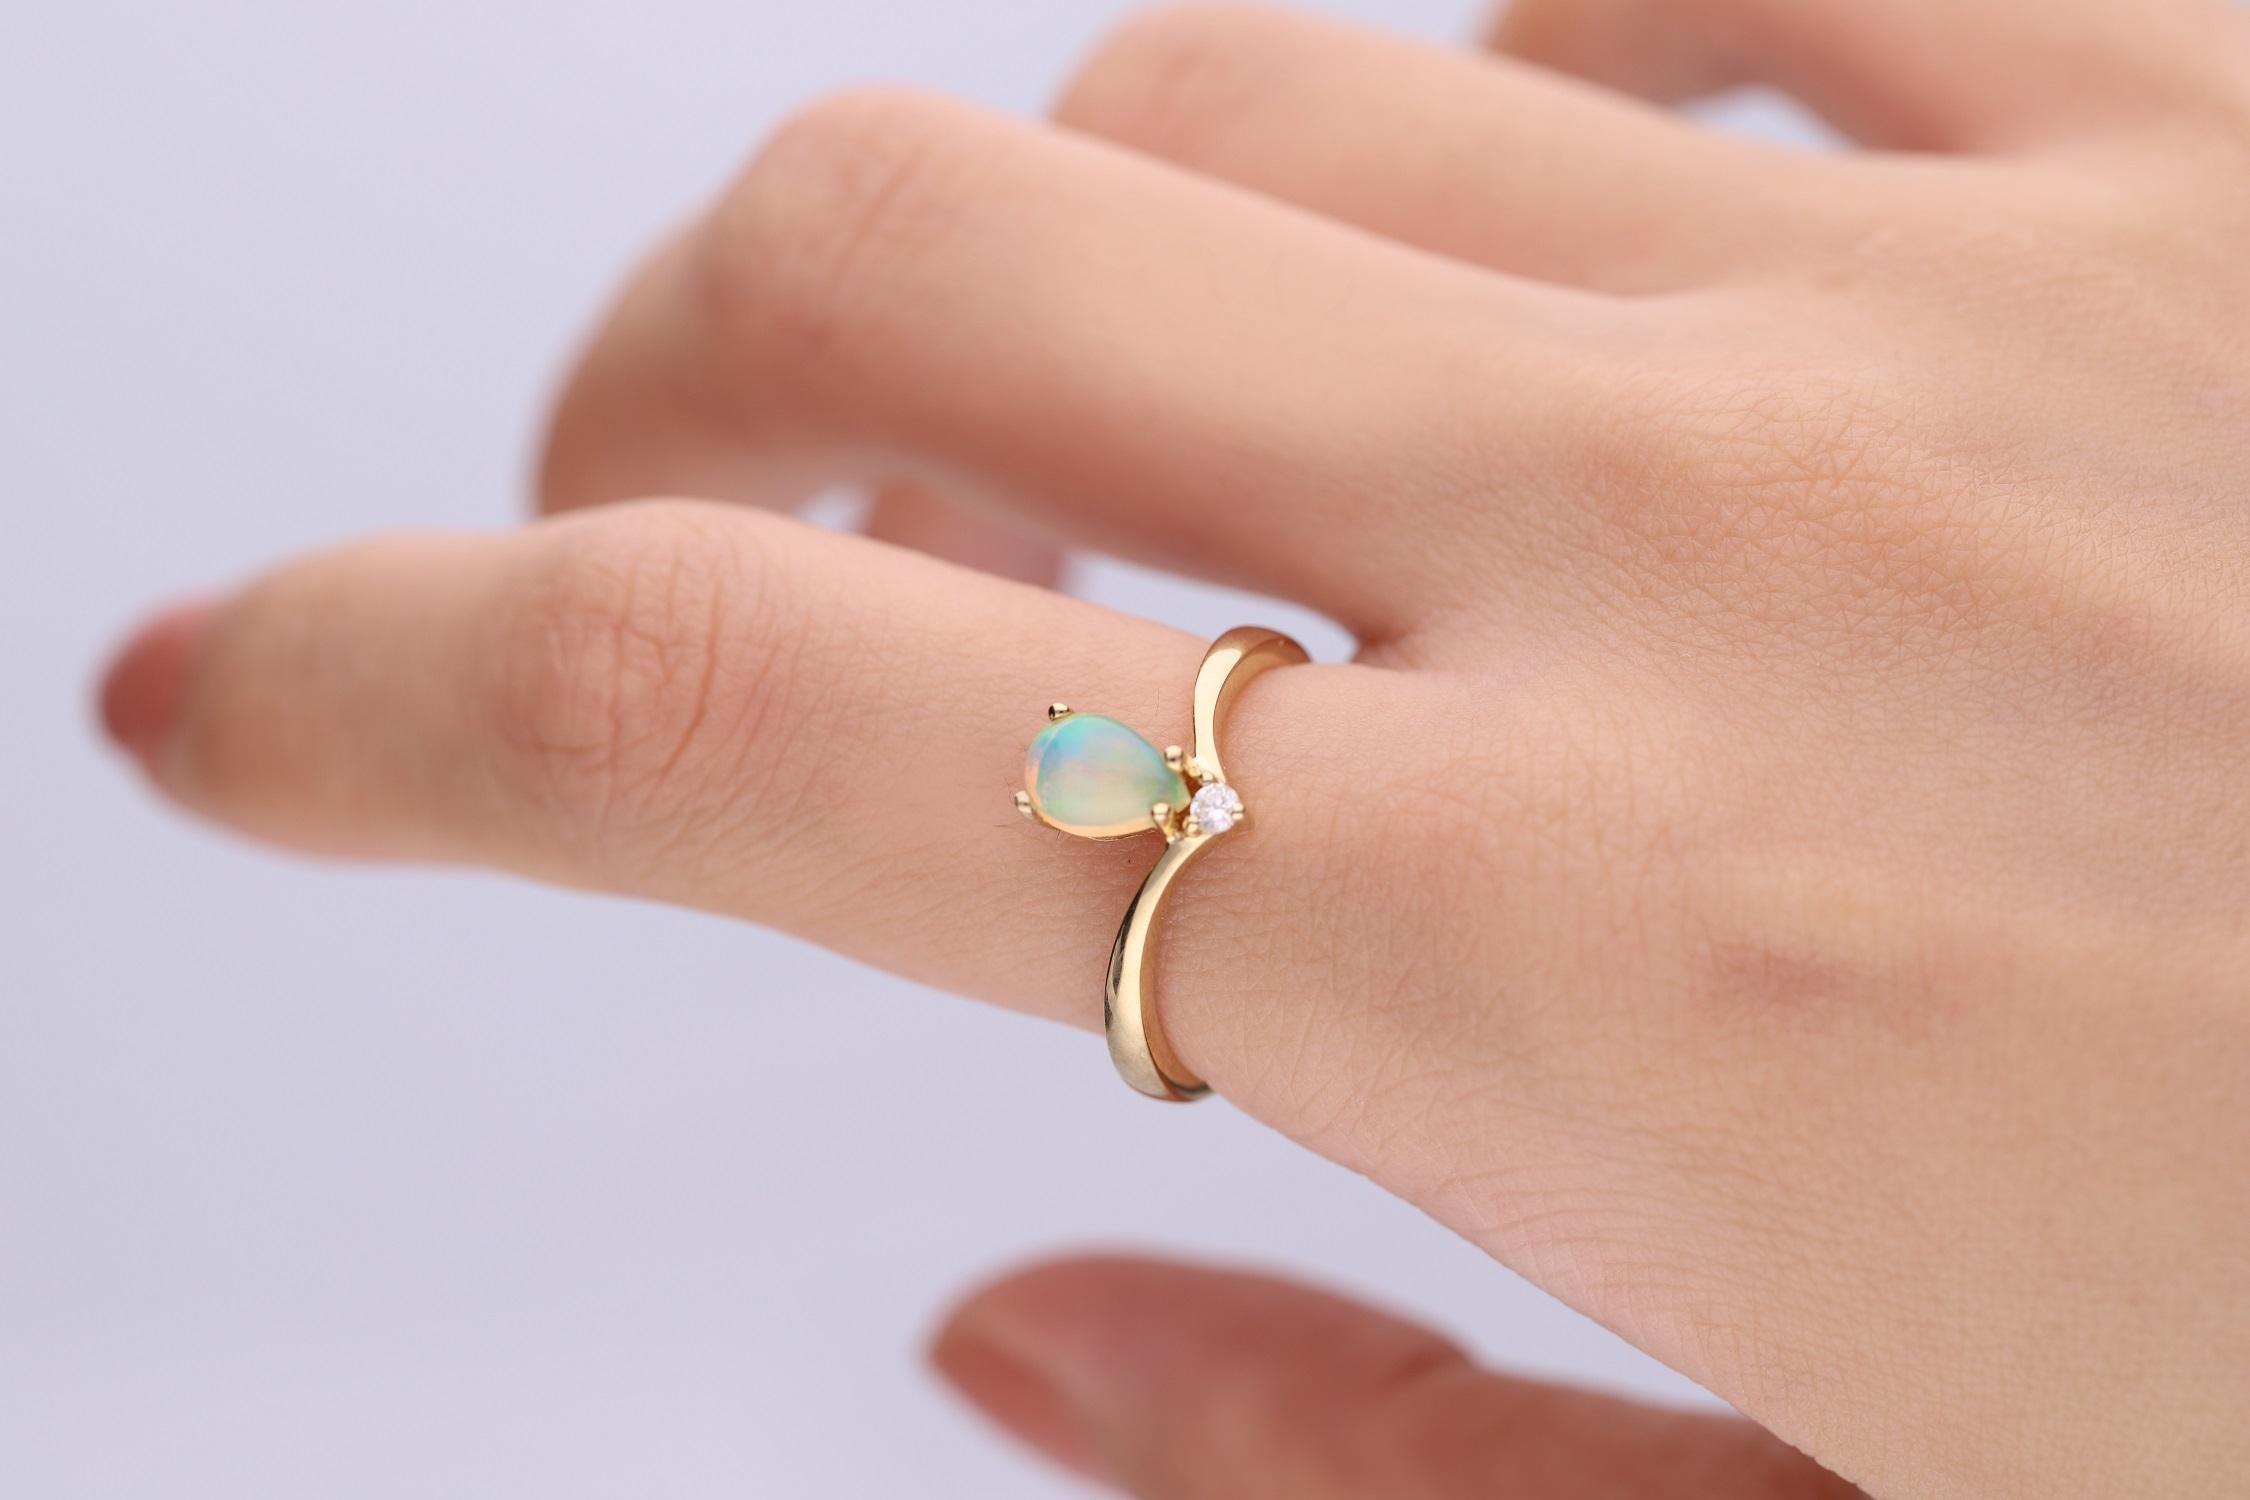 Decorate yourself in elegance with this Ring is crafted from 10-karat Yellow Gold by Gin & Grace. This Ring is made up of Pear-Cab (1 pcs) 0.51 carat Ethiopian Opal and Round-cut White Diamond (1 Pcs) 0.03 carat. This Ring is weight 2.46 grams. This